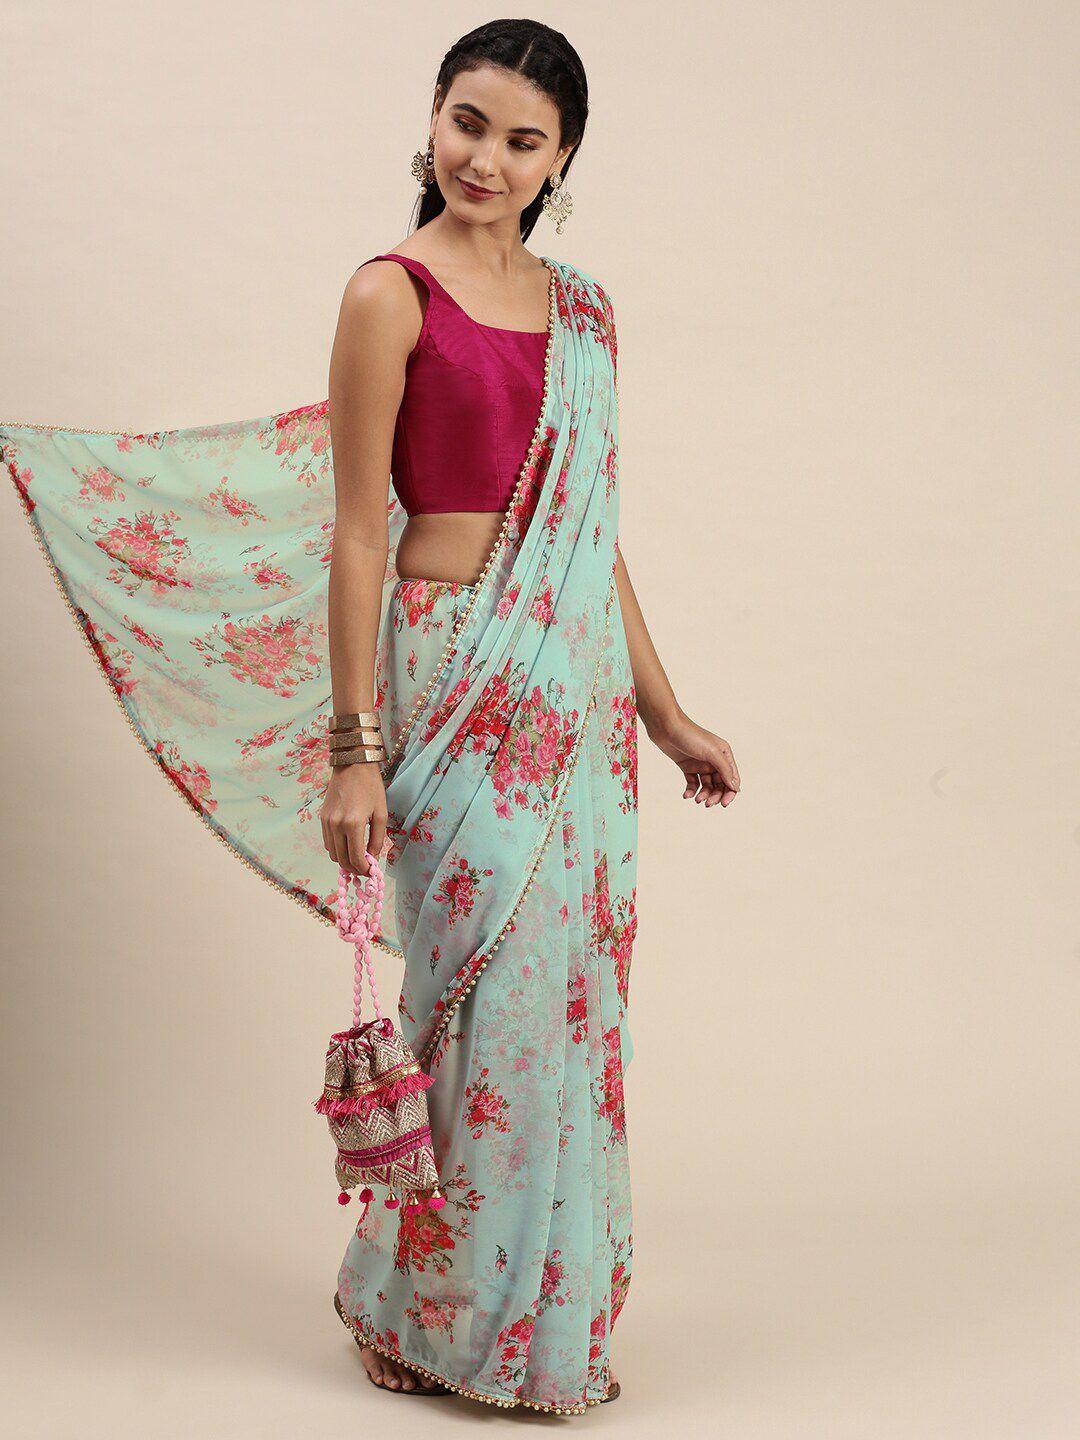 avanshee floral beads and stones saree